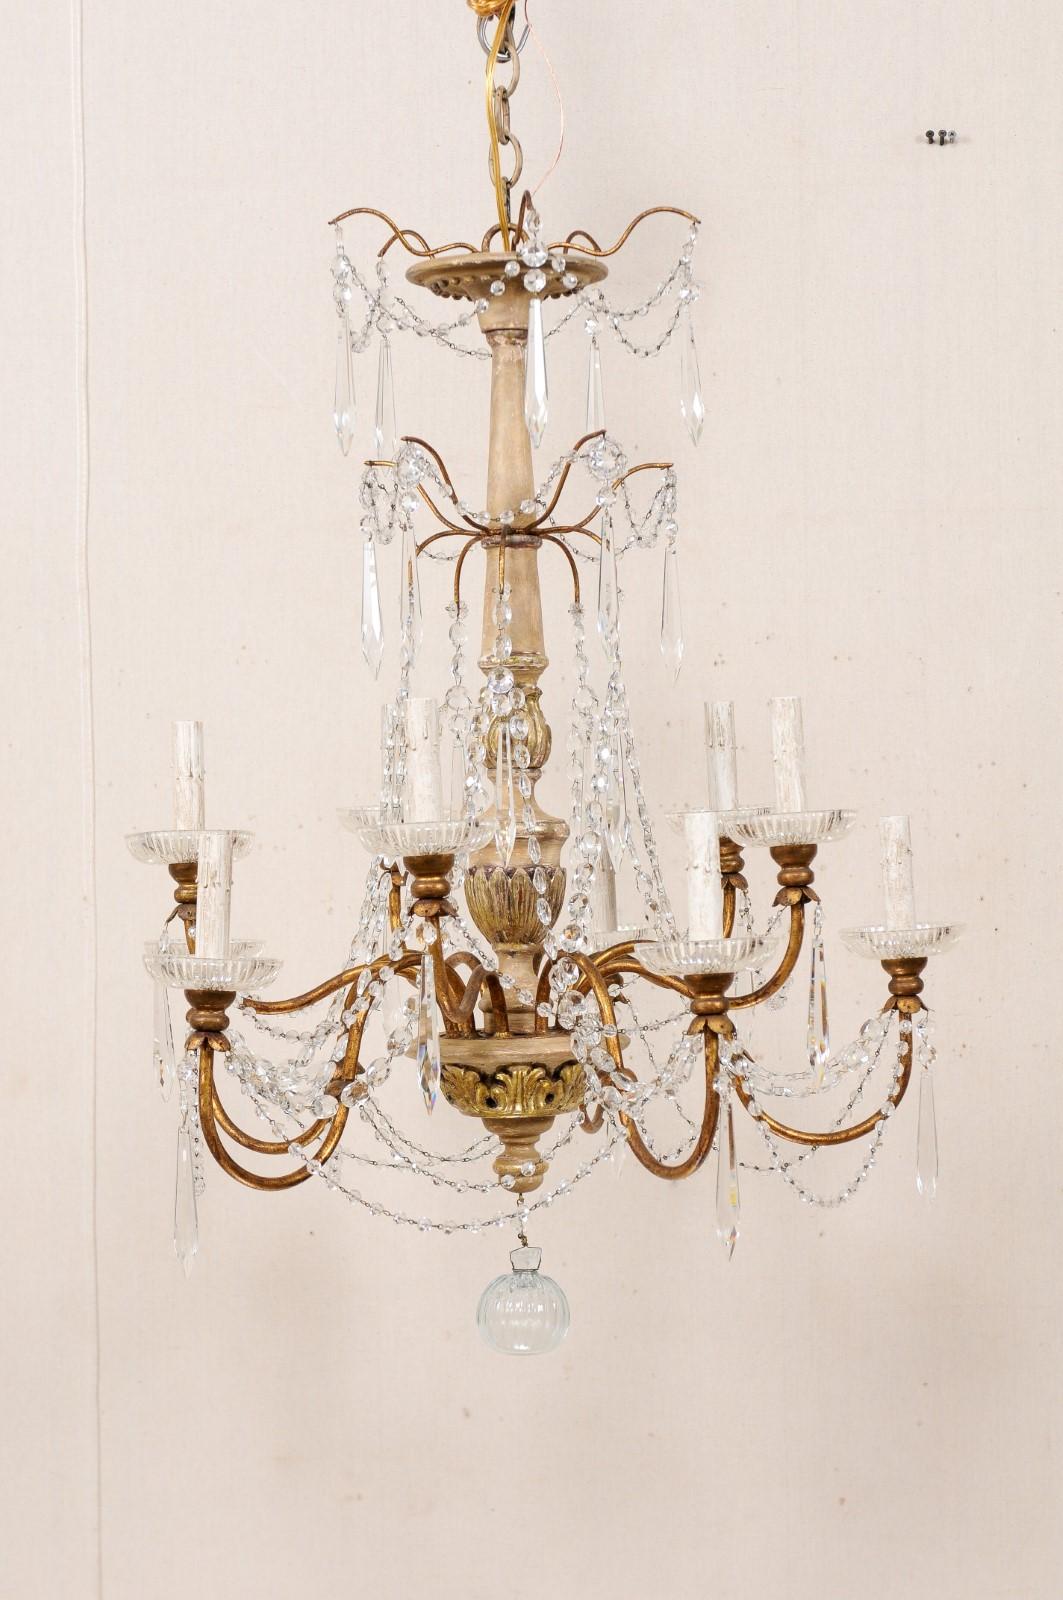 An Italian ten-light wood column style chandelier with crystal adornment from the mid-20th century. A chandelier from Italy features a decoratively carved central wood column with gilt acanthus leaf motif, and a prominent two-tiered splayed crystal